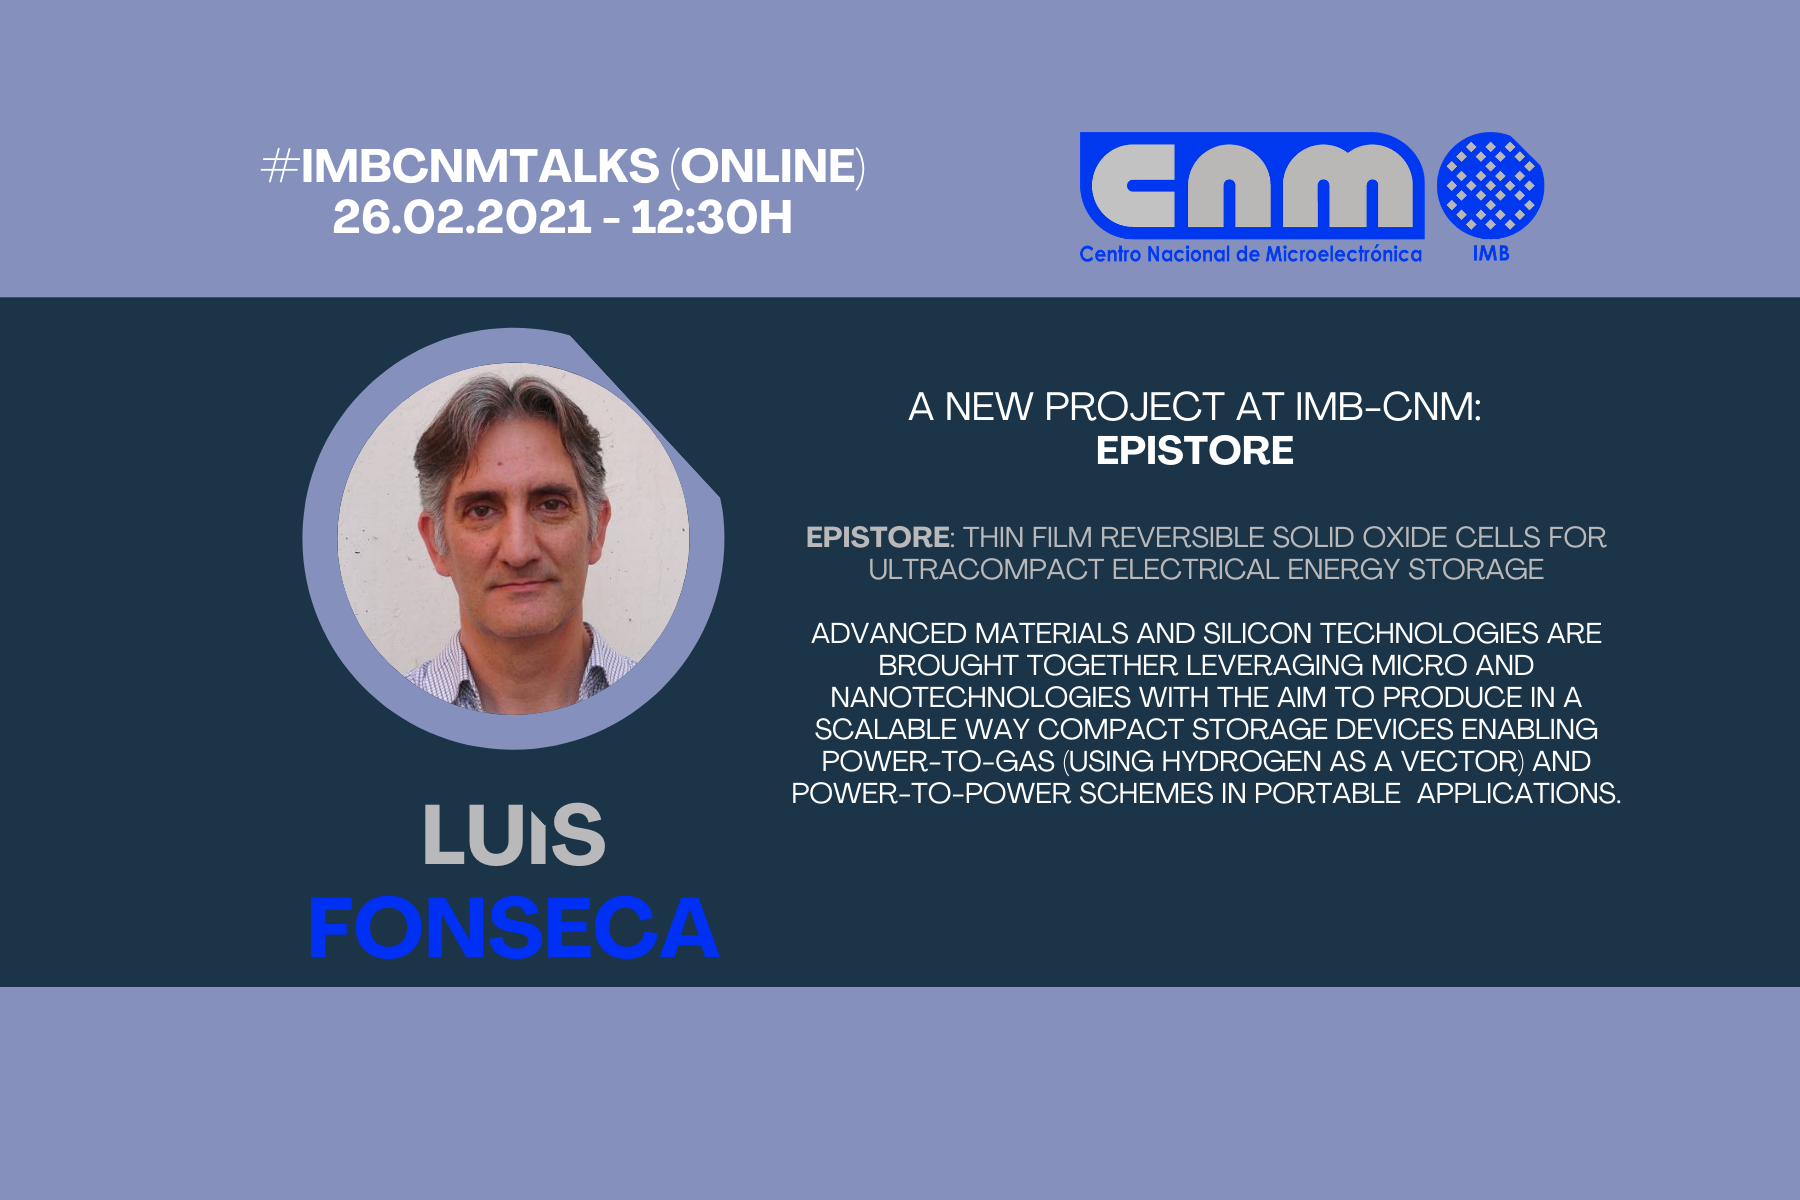 Luis Fonseca presents project Epistore Friday 26th February